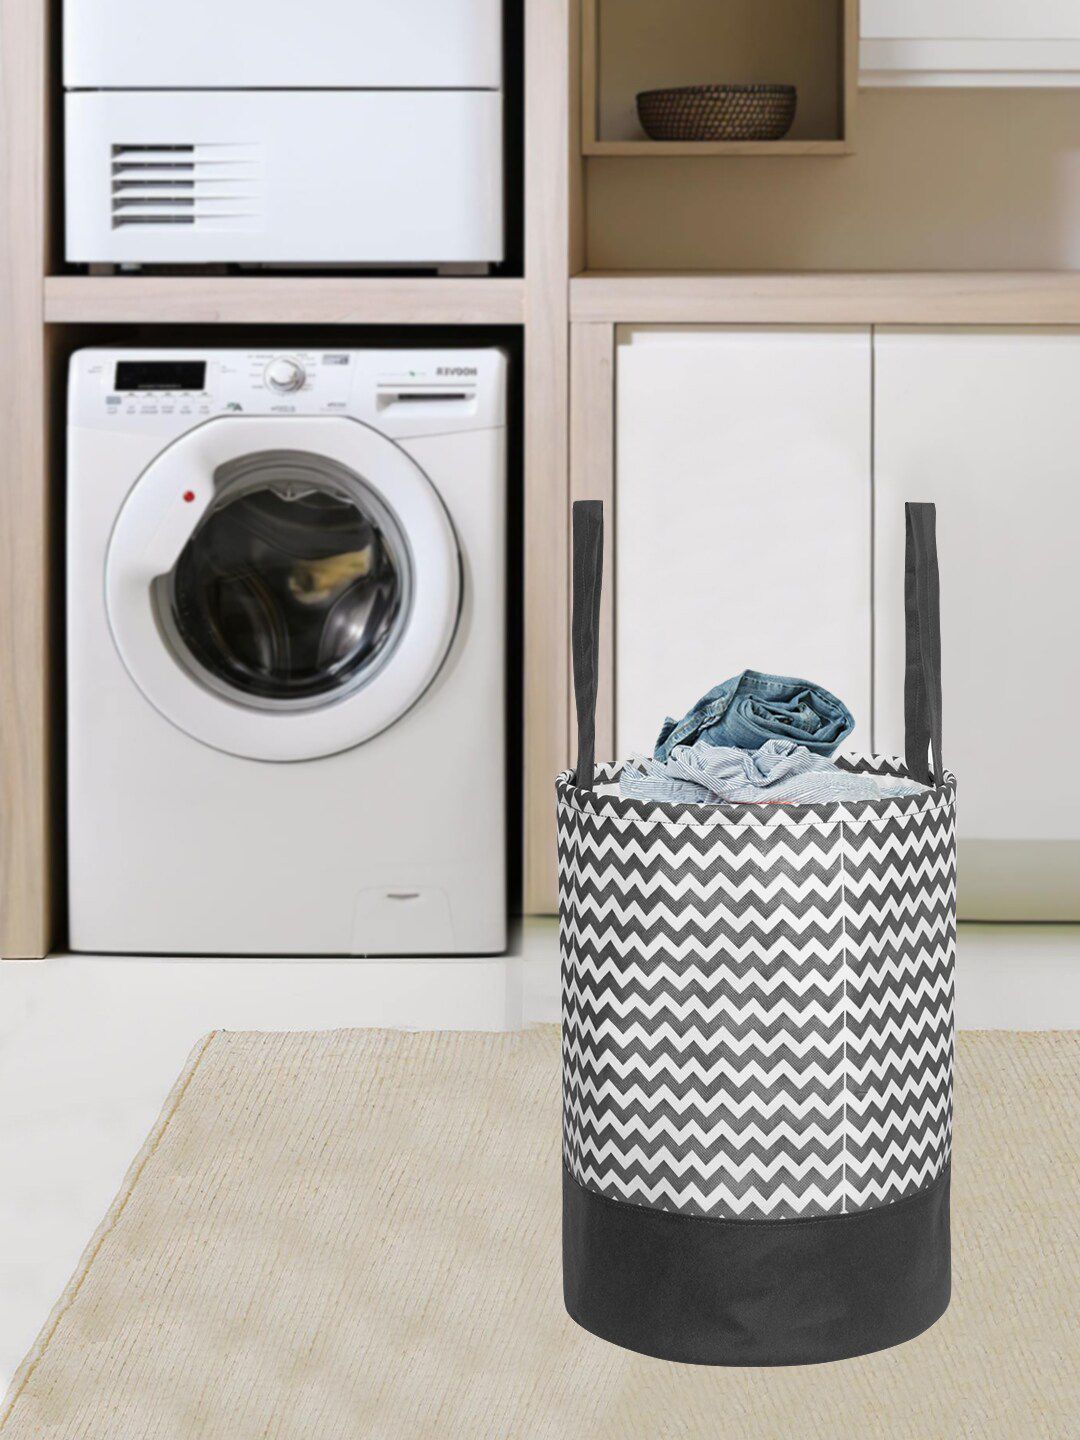 Prettykrafts Black Printed Round Foldable Laundry Basket Price in India